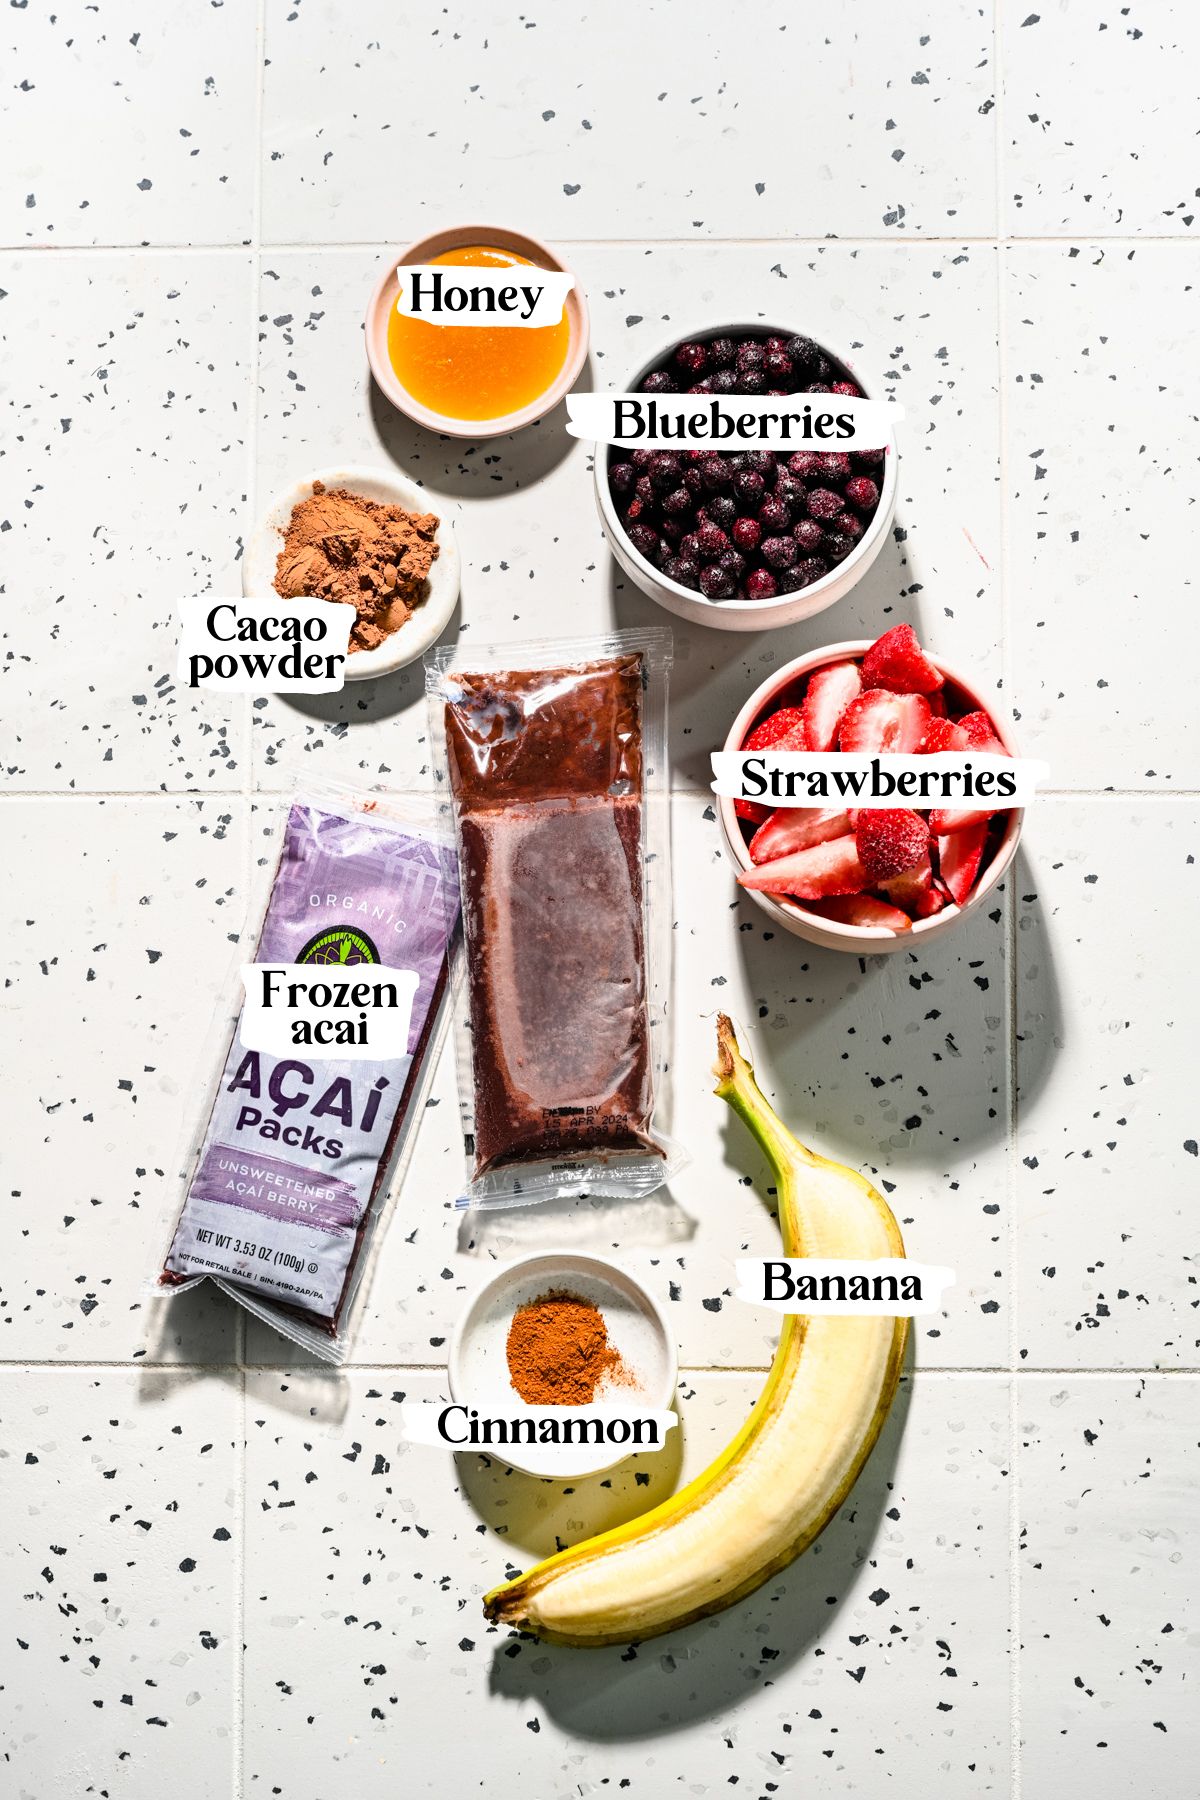 Chocolate acai bowl ingredients including banana and cacao powder.